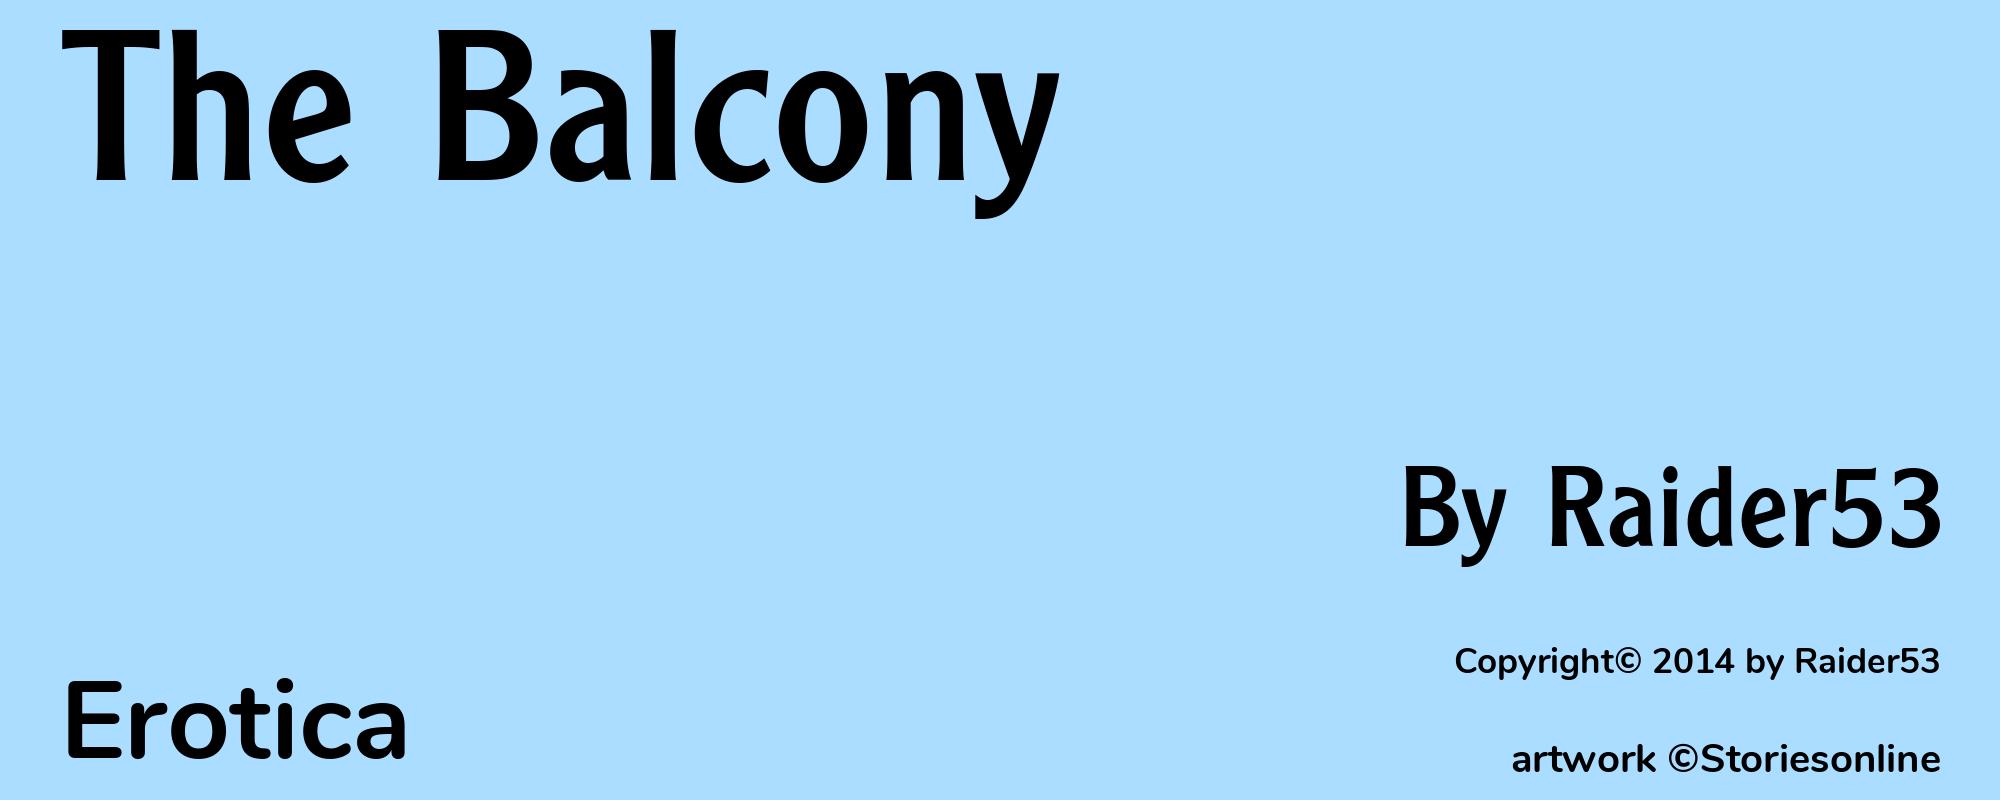 The Balcony - Cover